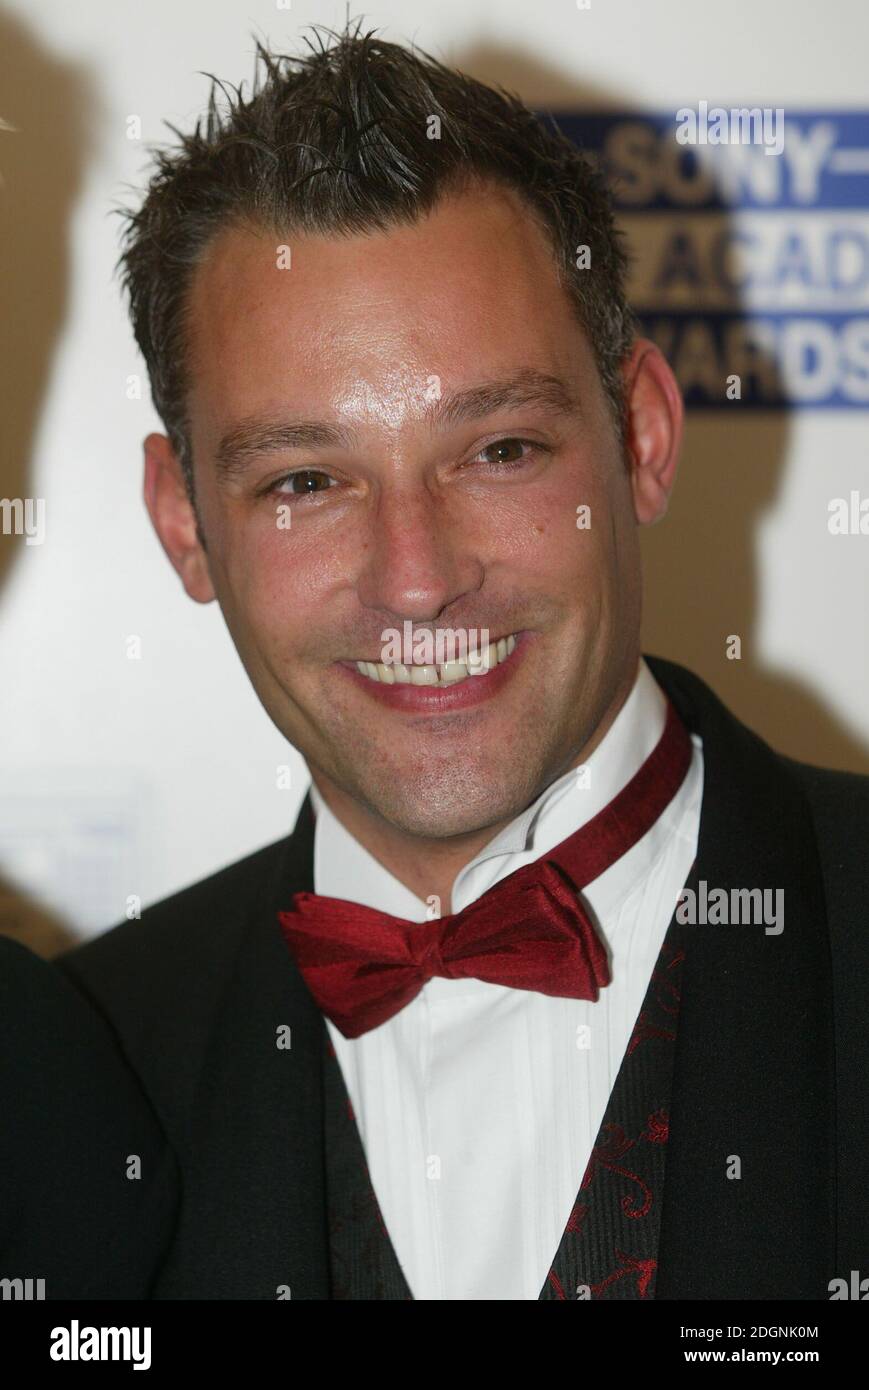 Toby Anstis at the Sony Radio Academy Awards held at the Grosvenor House Hotel in Londons Park Lane. Headshot.  Â©doug peters/allaction.co.uk  Stock Photo